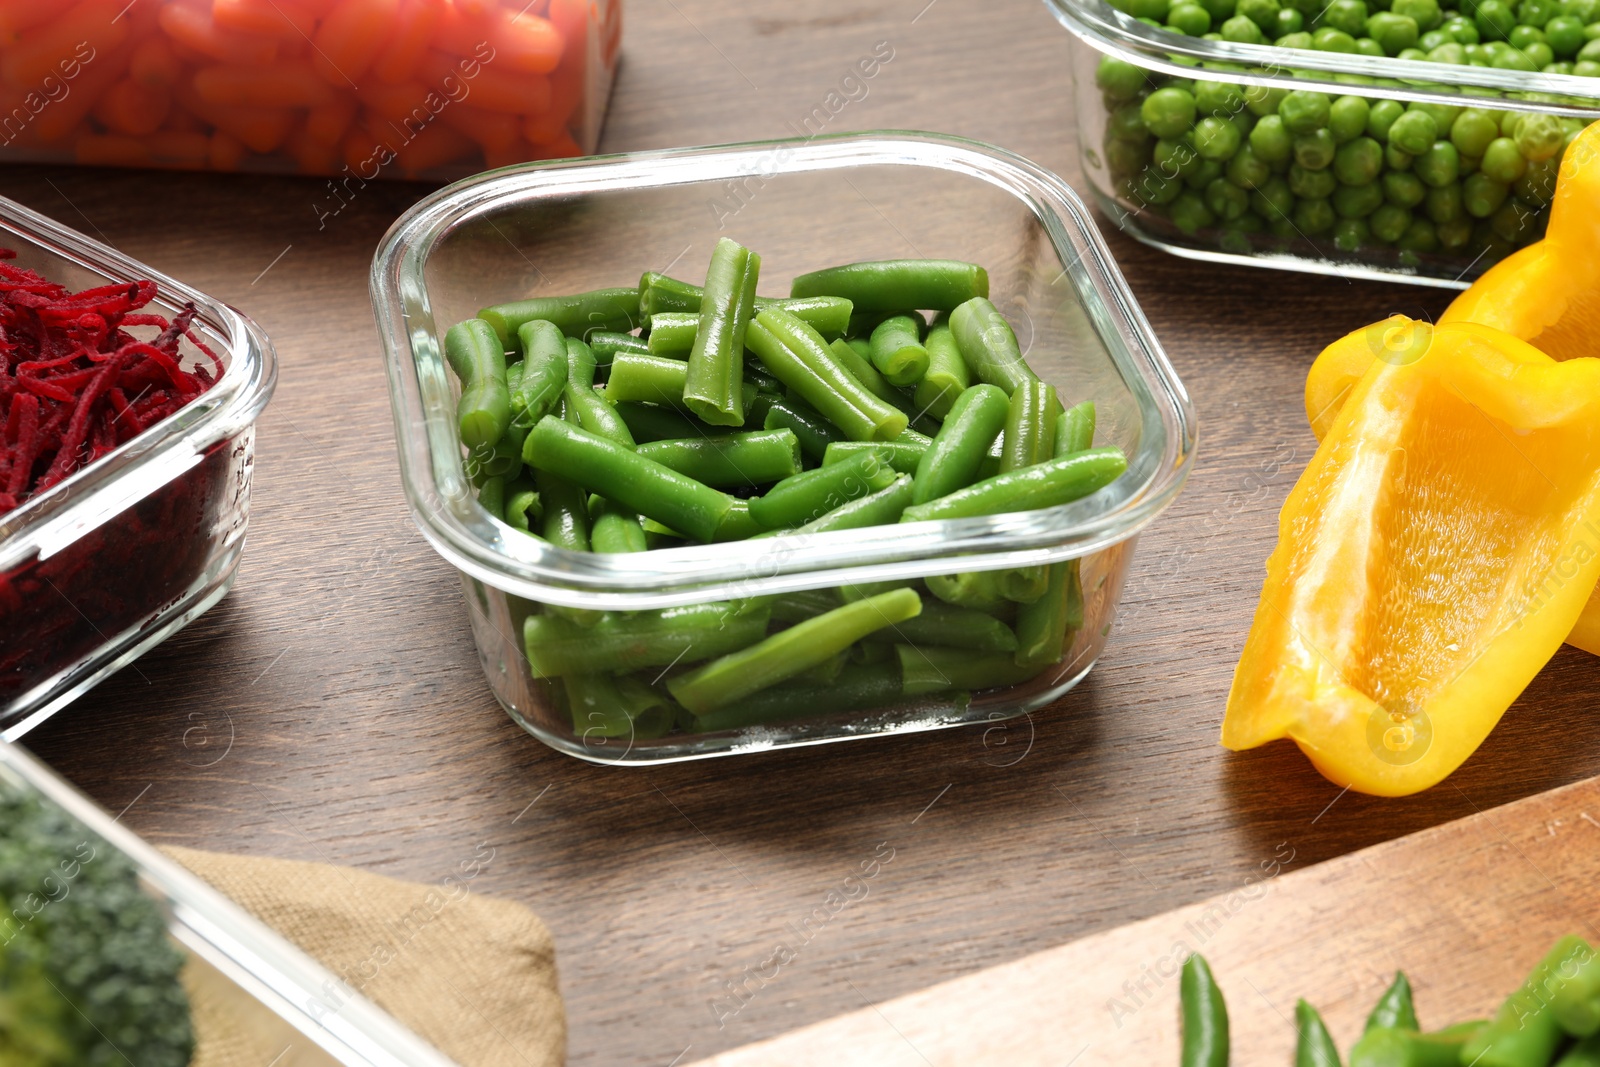 Photo of Containers with green beans and fresh products on wooden table. Food storage